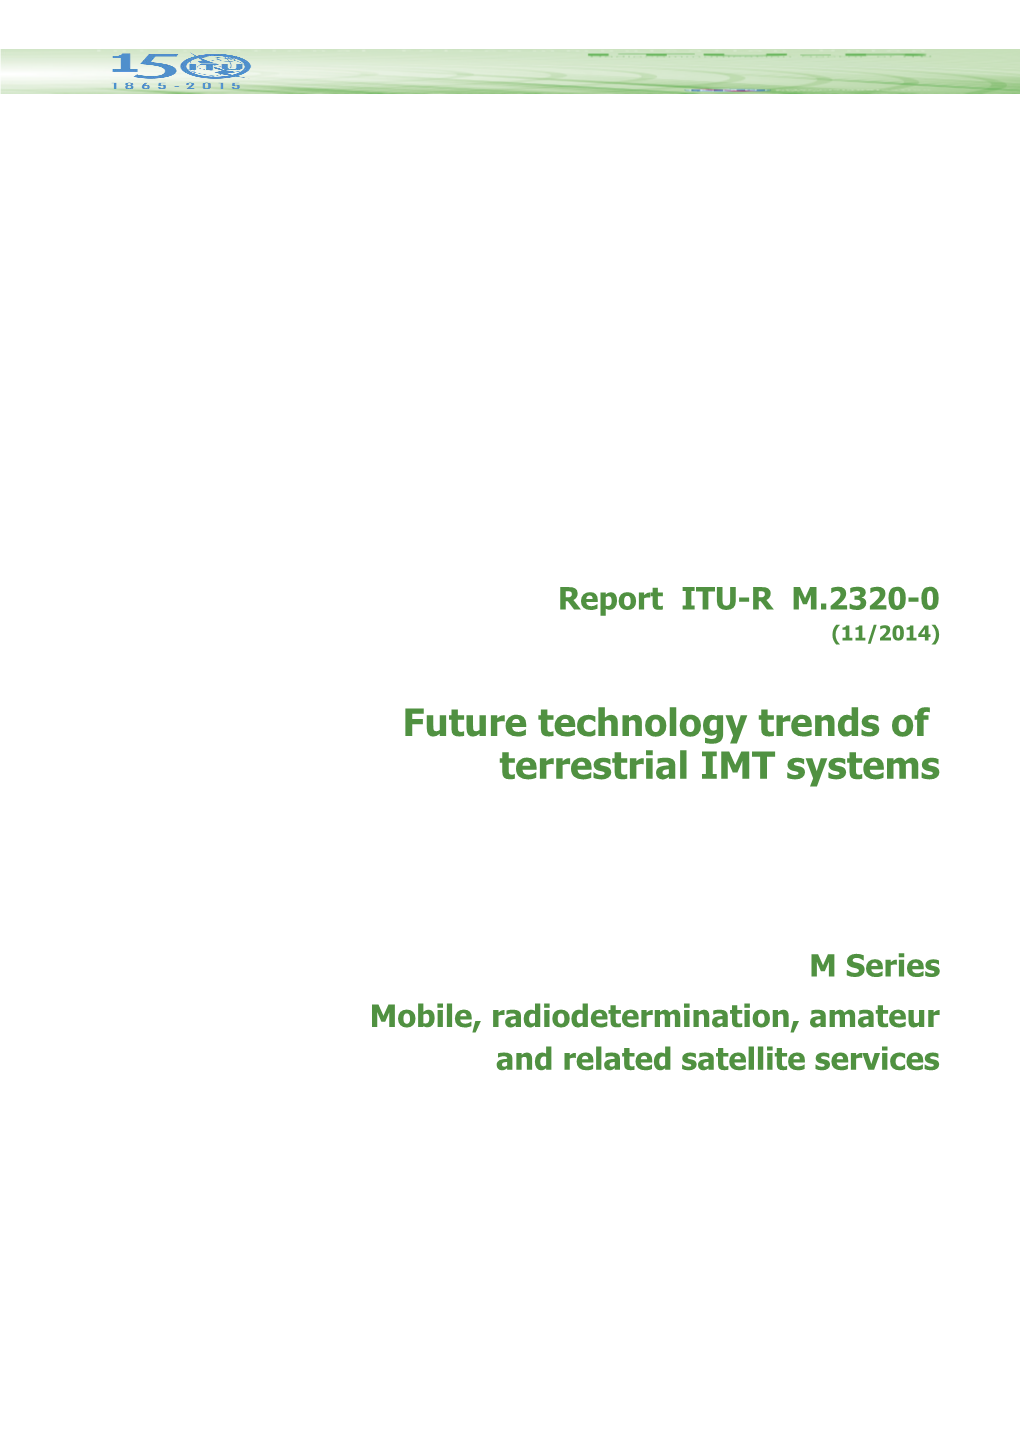 Future Technology Trends of Terrestrial IMT Systems